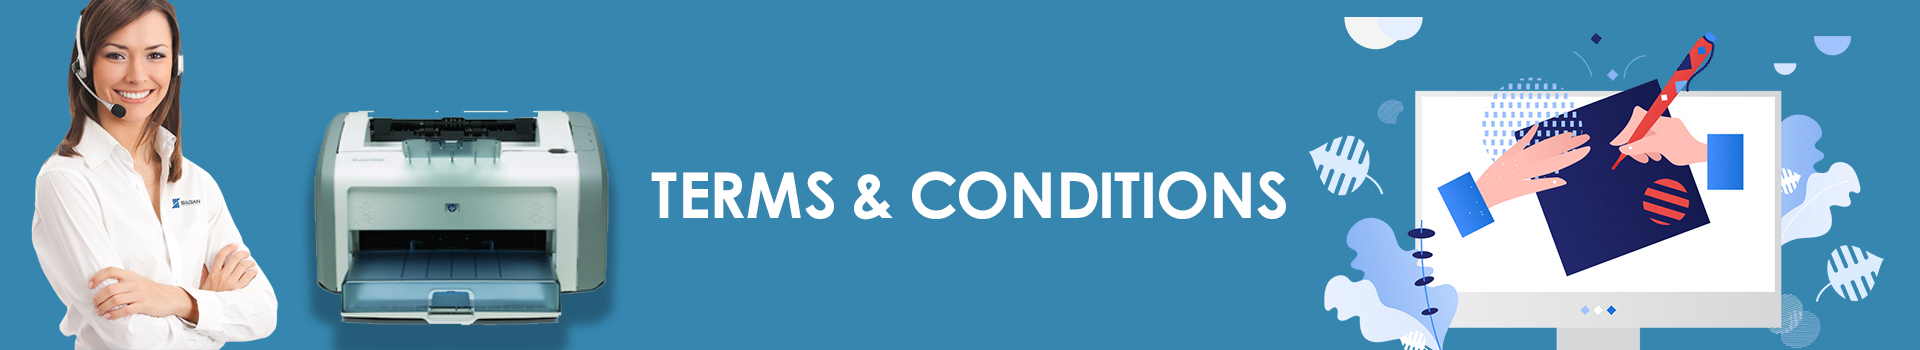 Terms-&-Conditions